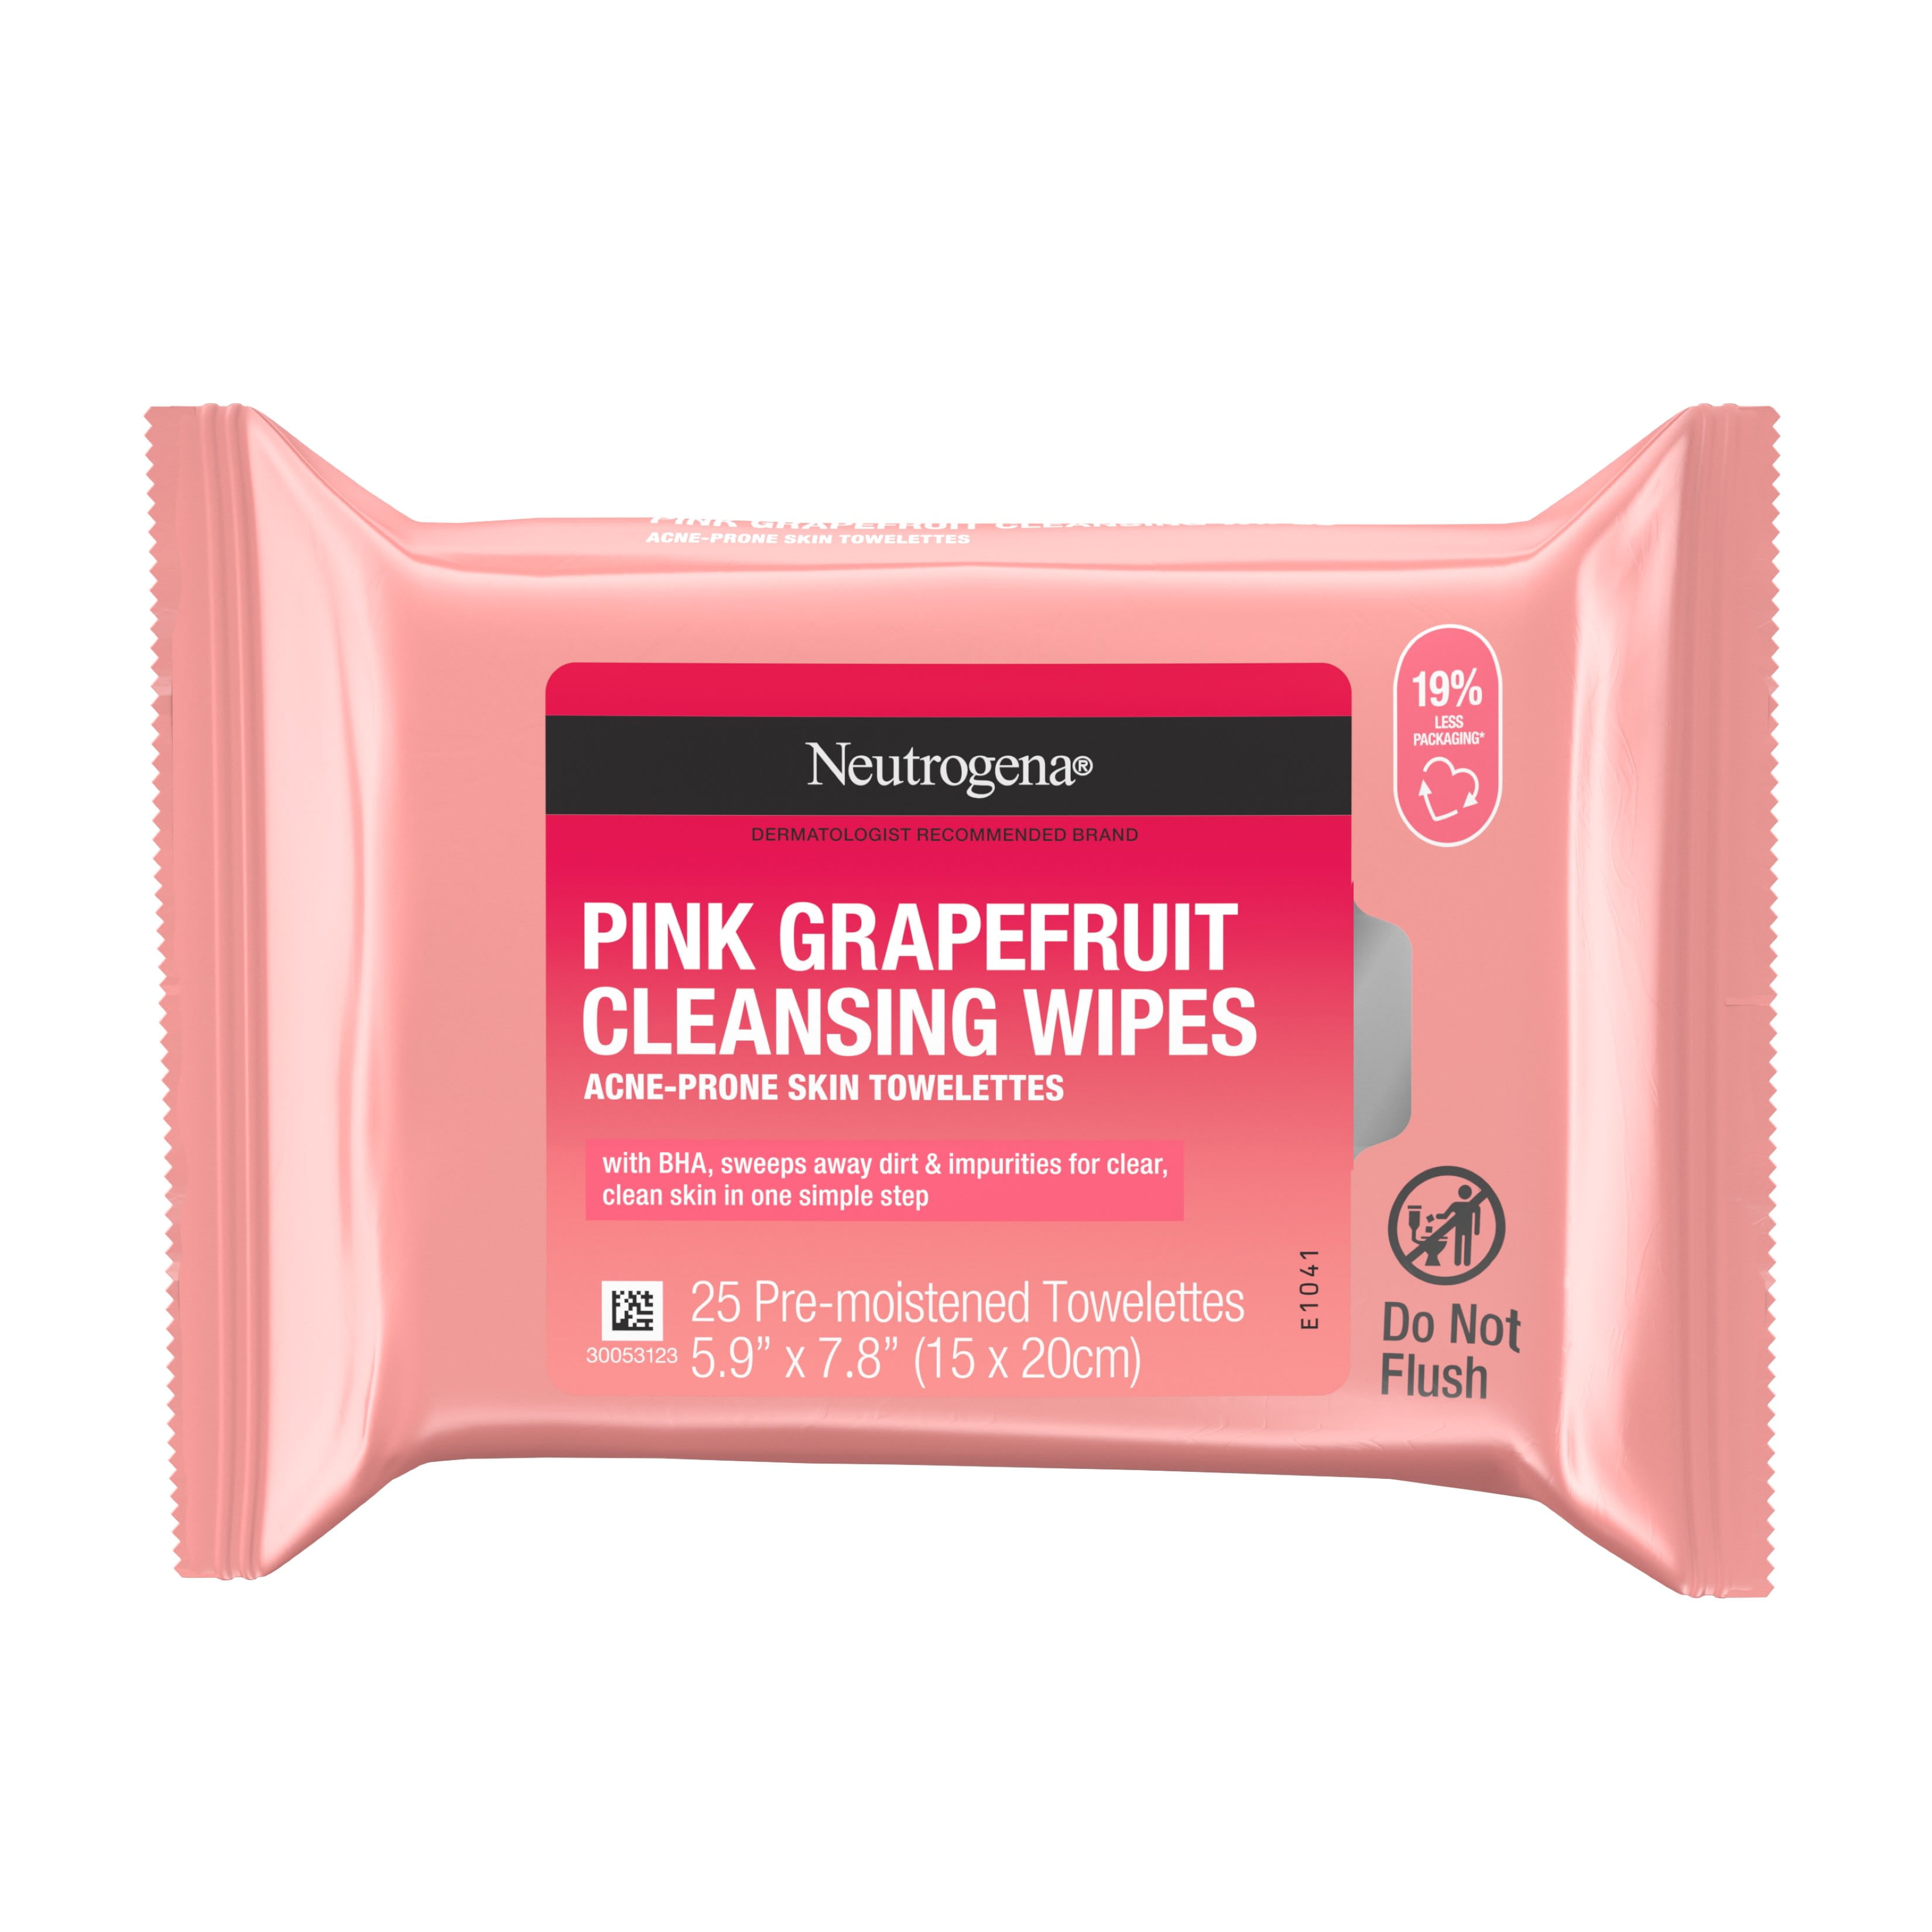 Neutrogena Oil-Free Facial Cleansing Wipes, Pink Grapefruit, 25 ct